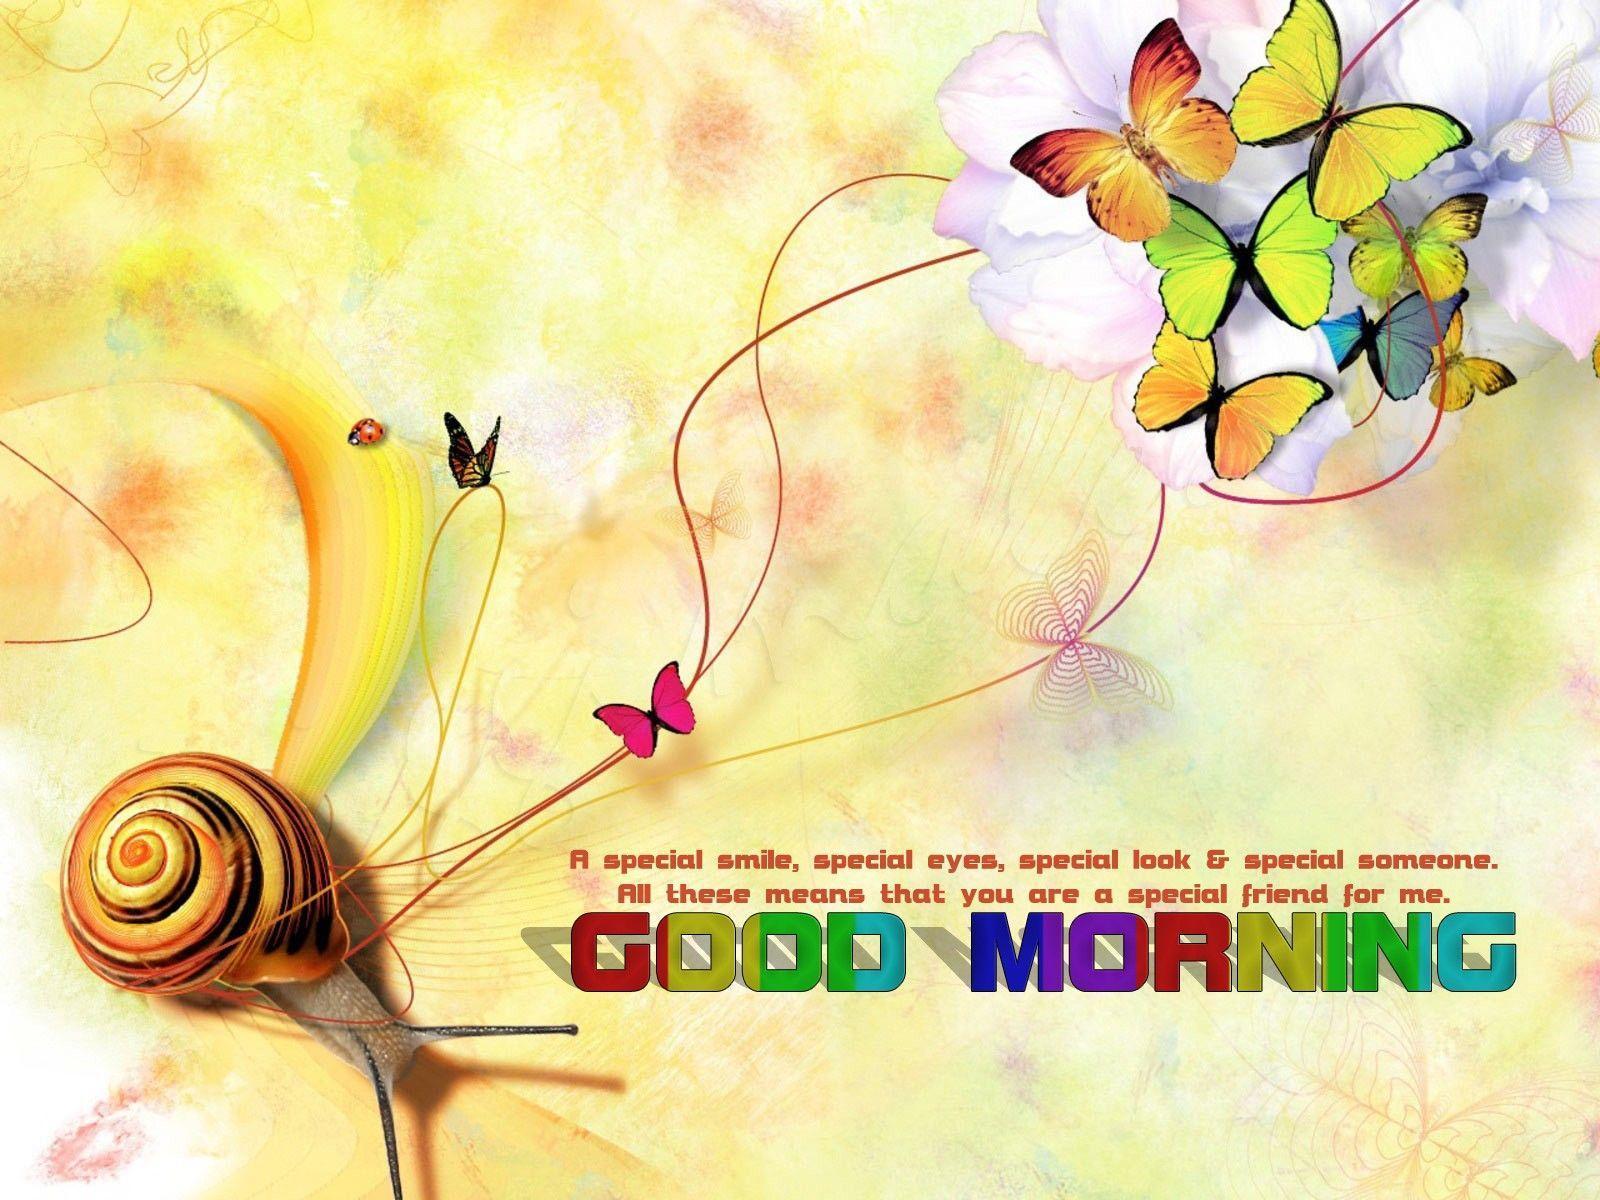 Good Morning Latest Hd Wishes Wallpaper Nicehdwallpaper.net. Nice